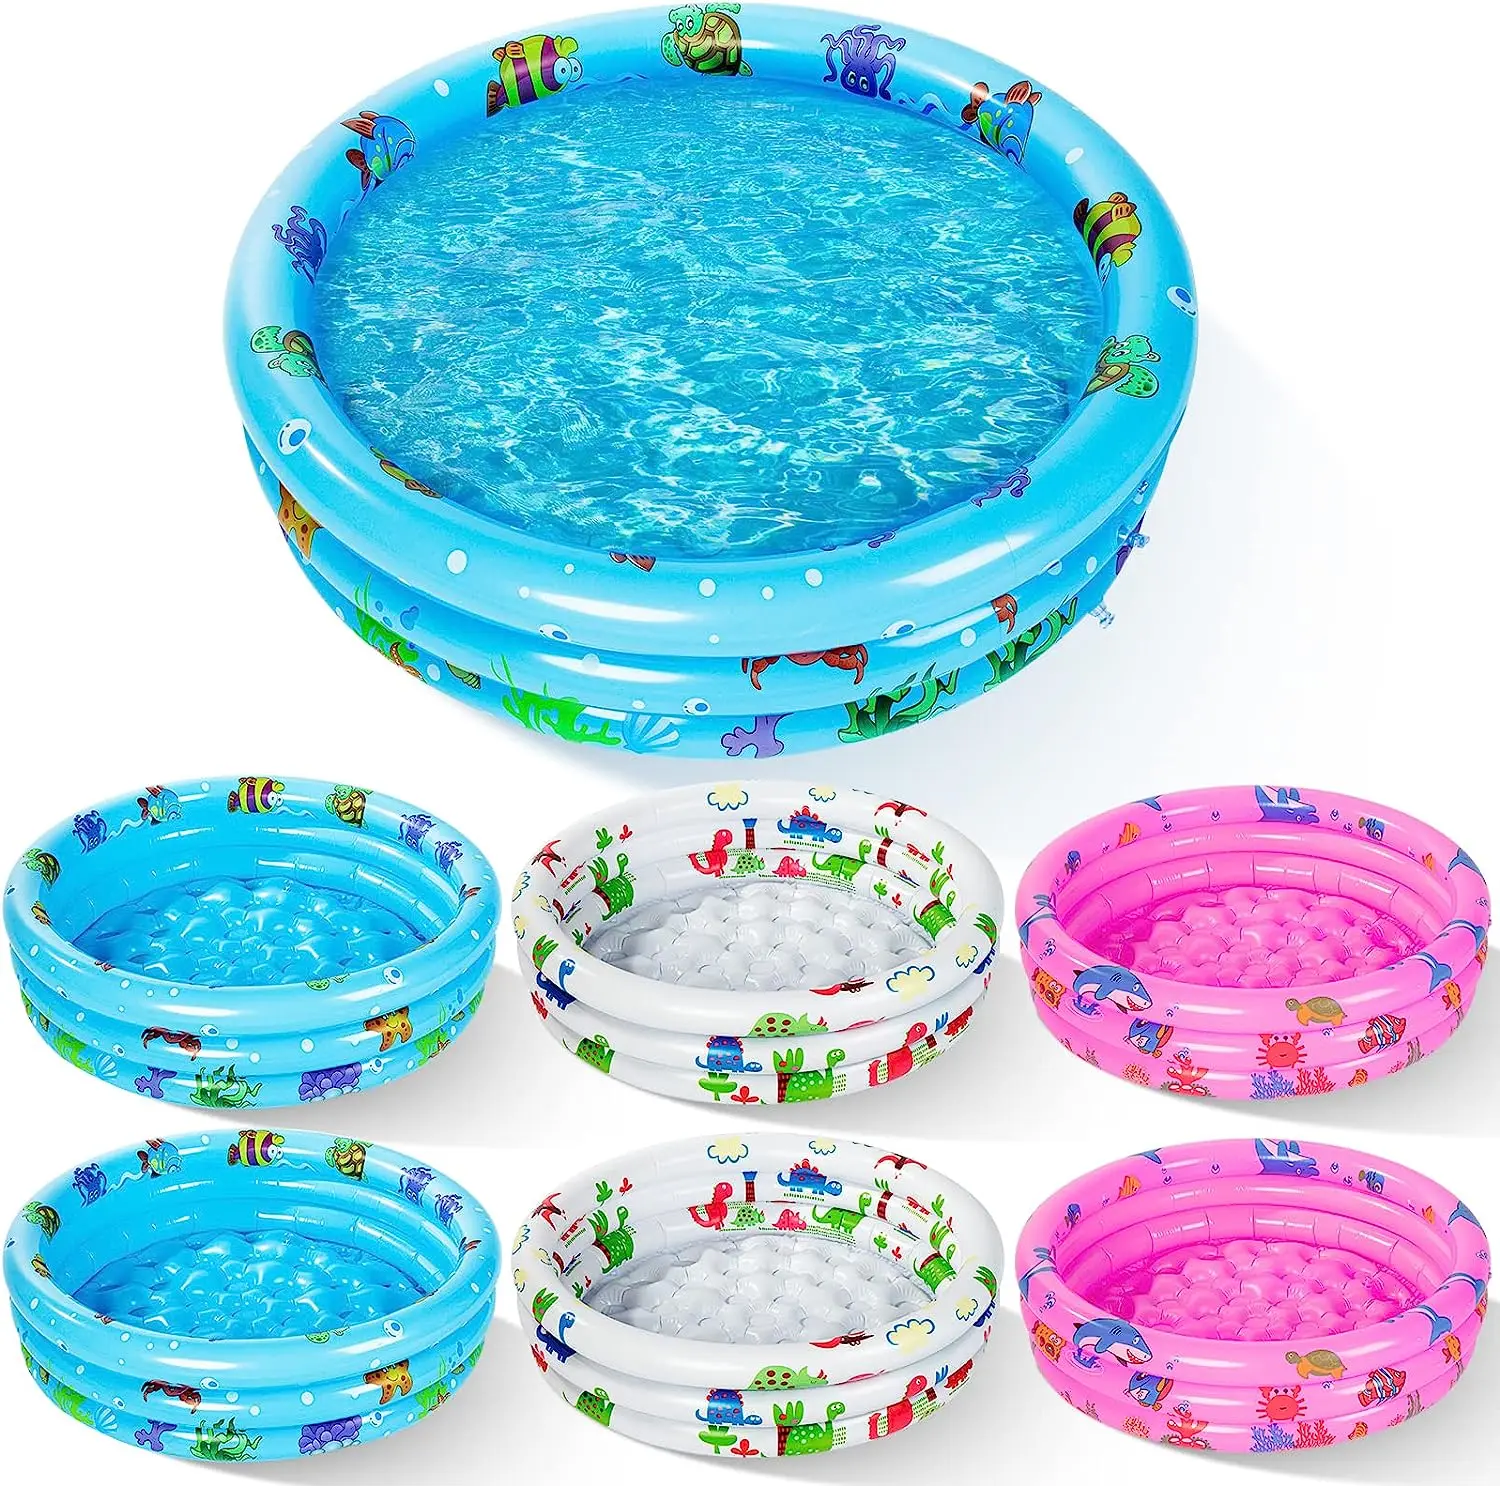 80*30cm Kiddie Pool with Inflatable Bottom Sea Fish Baby Swimming Pool R... - $30.71